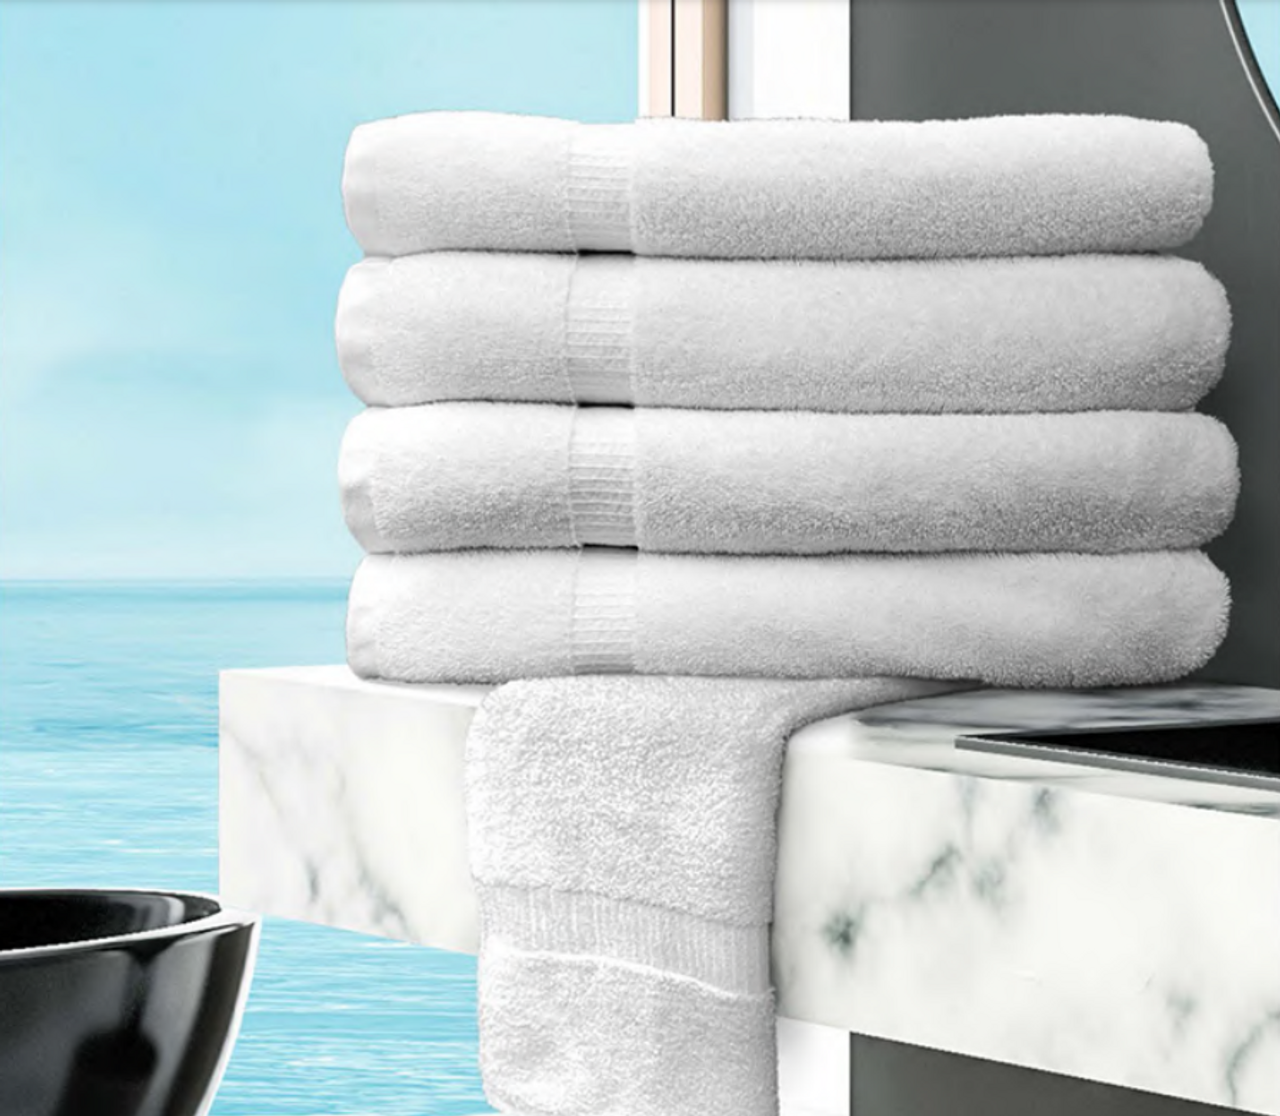 https://cdn11.bigcommerce.com/s-iys0o/images/stencil/1280x1280/products/2012/4312/Belleza_Towels_Group__21819.1622731164.png?c=2